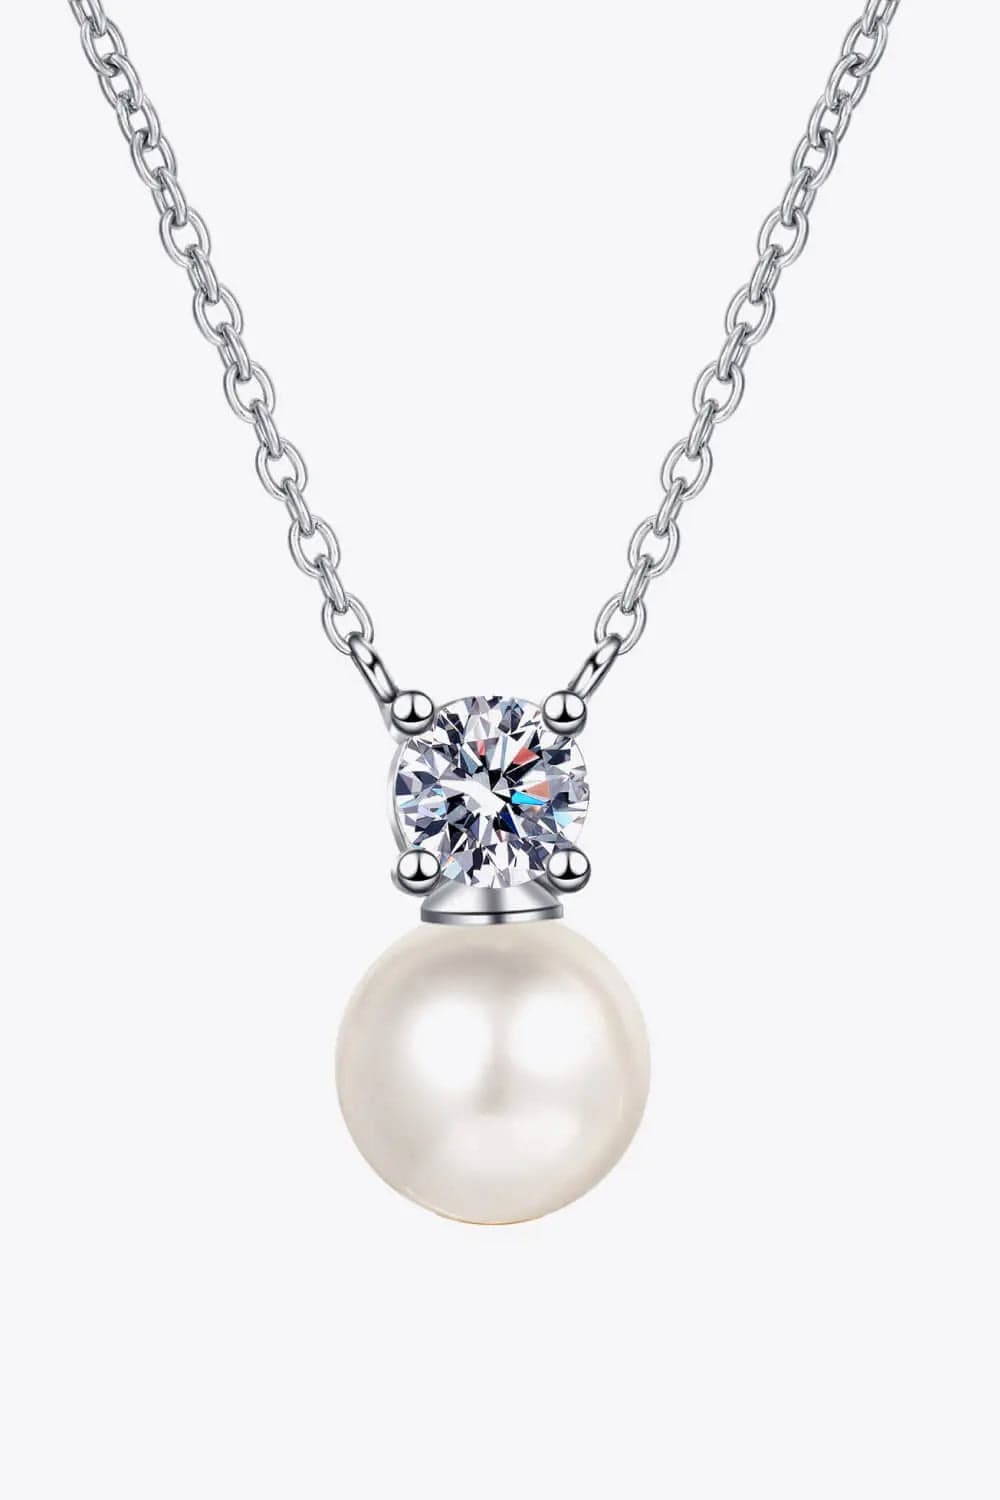 925 Sterling Silver Freshwater Pearl Moissanite Necklace - CLASSY CLOSET BOUTIQUE925 Sterling Silver Freshwater Pearl Moissanite Necklacejewelry100100473078262100100473078262Silver/PearlOne Size